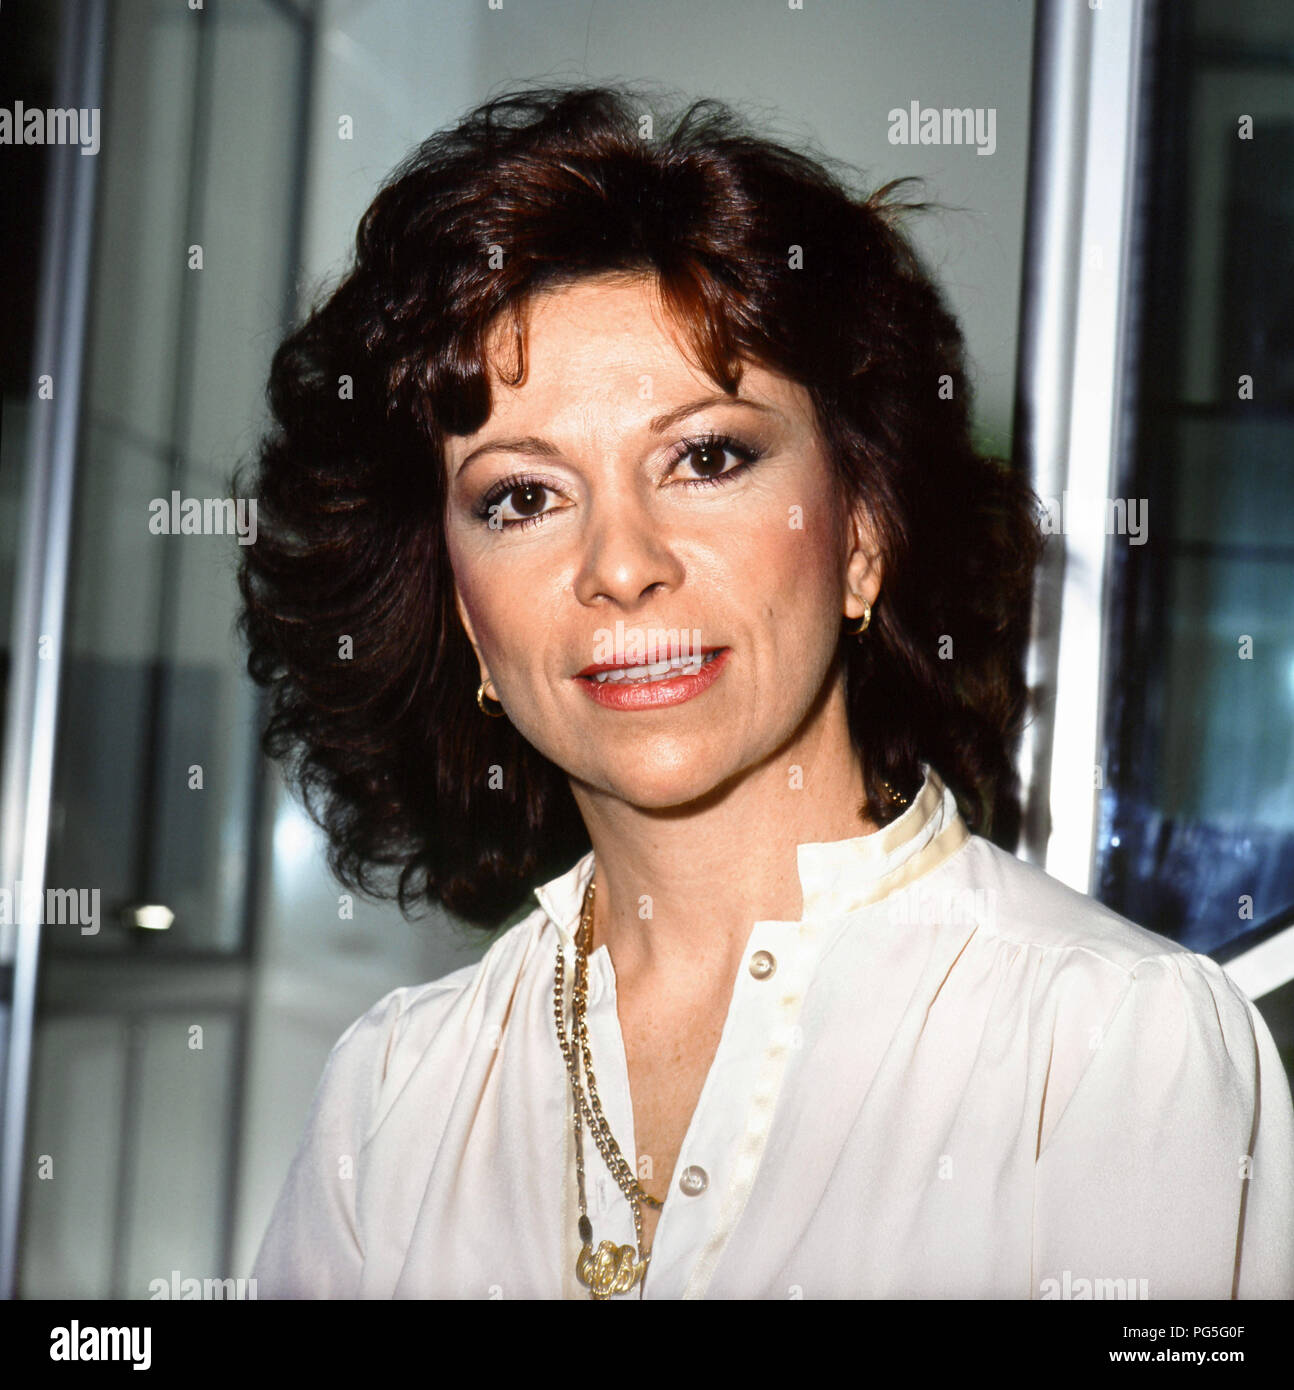 Isabel Allende in Cile (scrittore) - 04/10/1984 Foto stock - Alamy